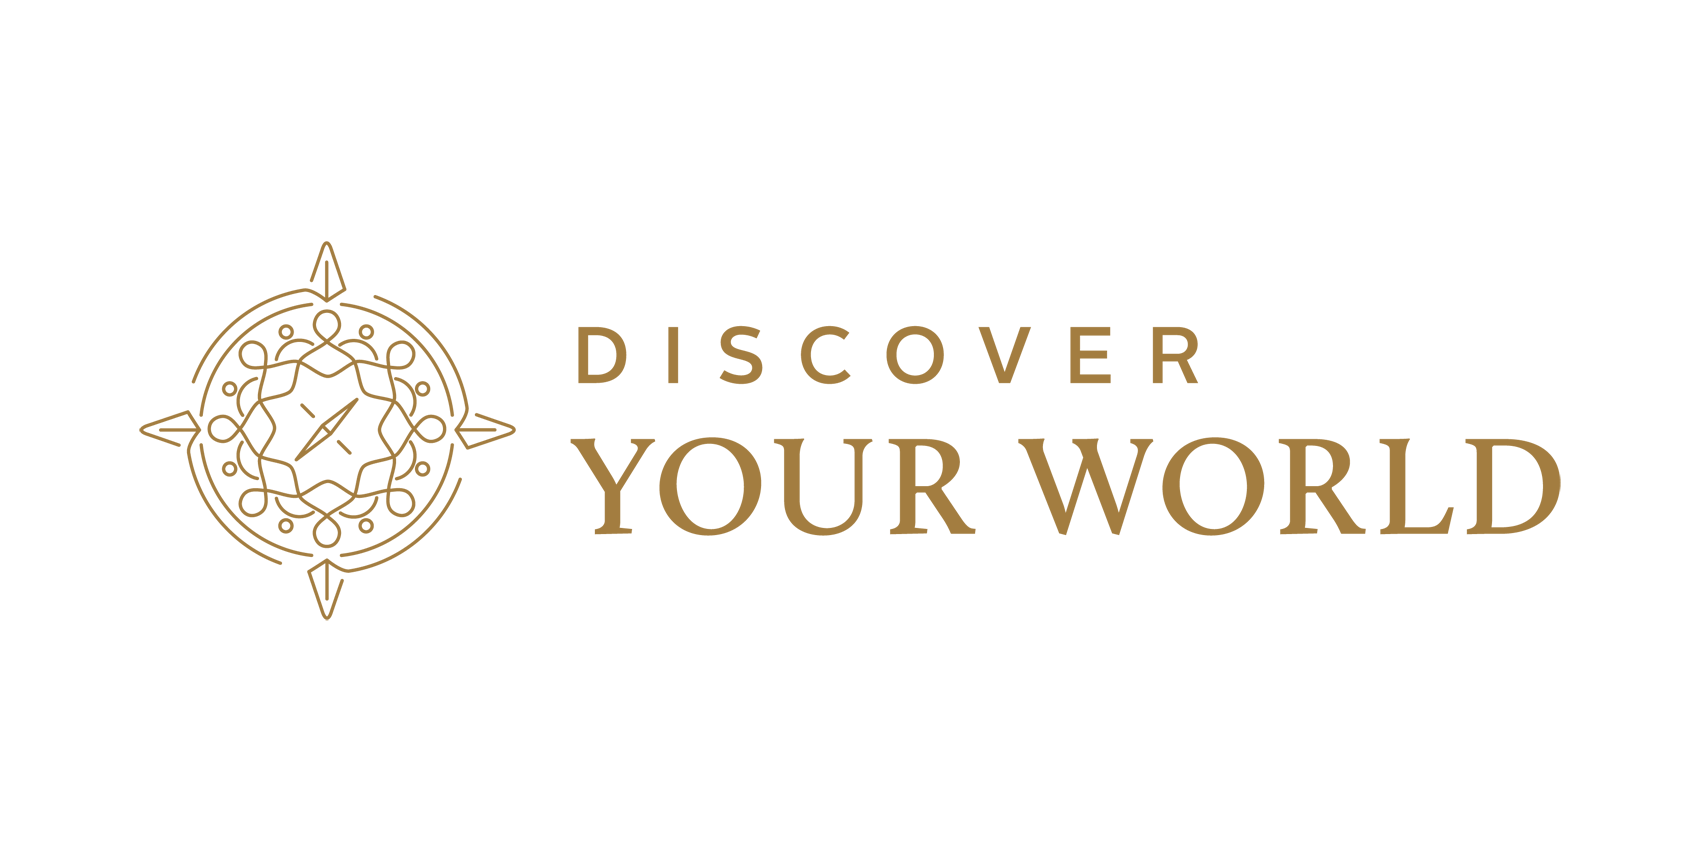 Discover your world